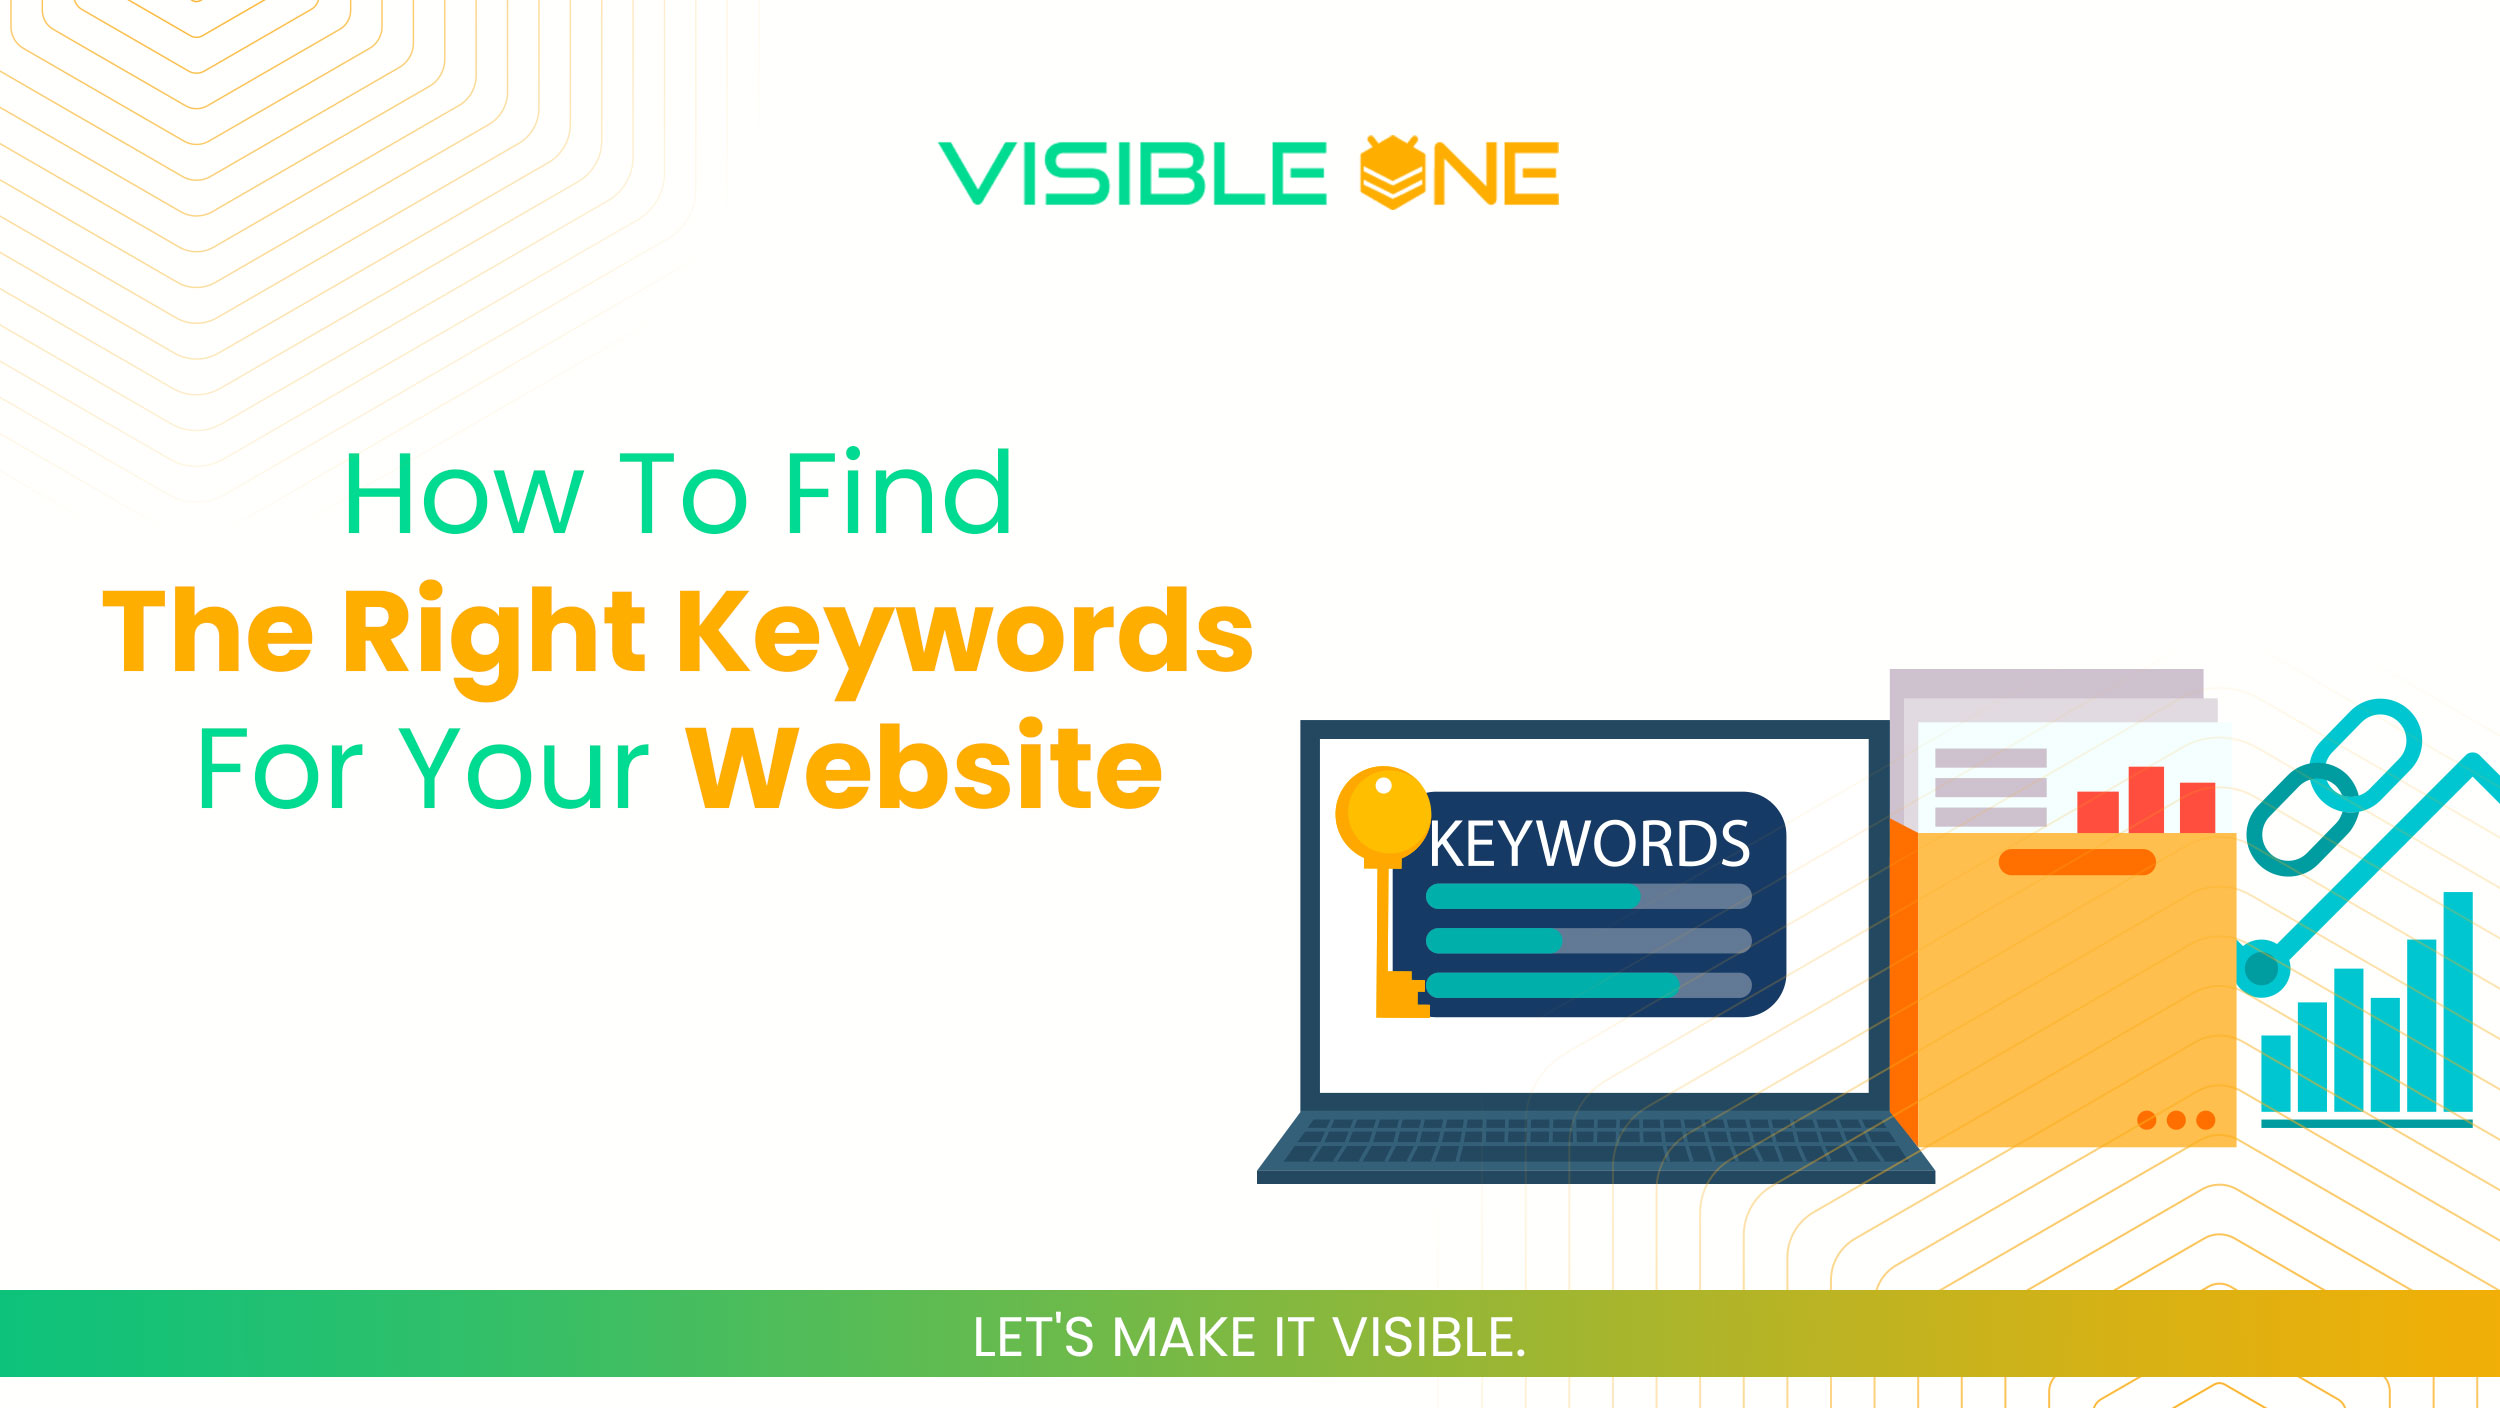 How To Find The Right Keywords For Your Website